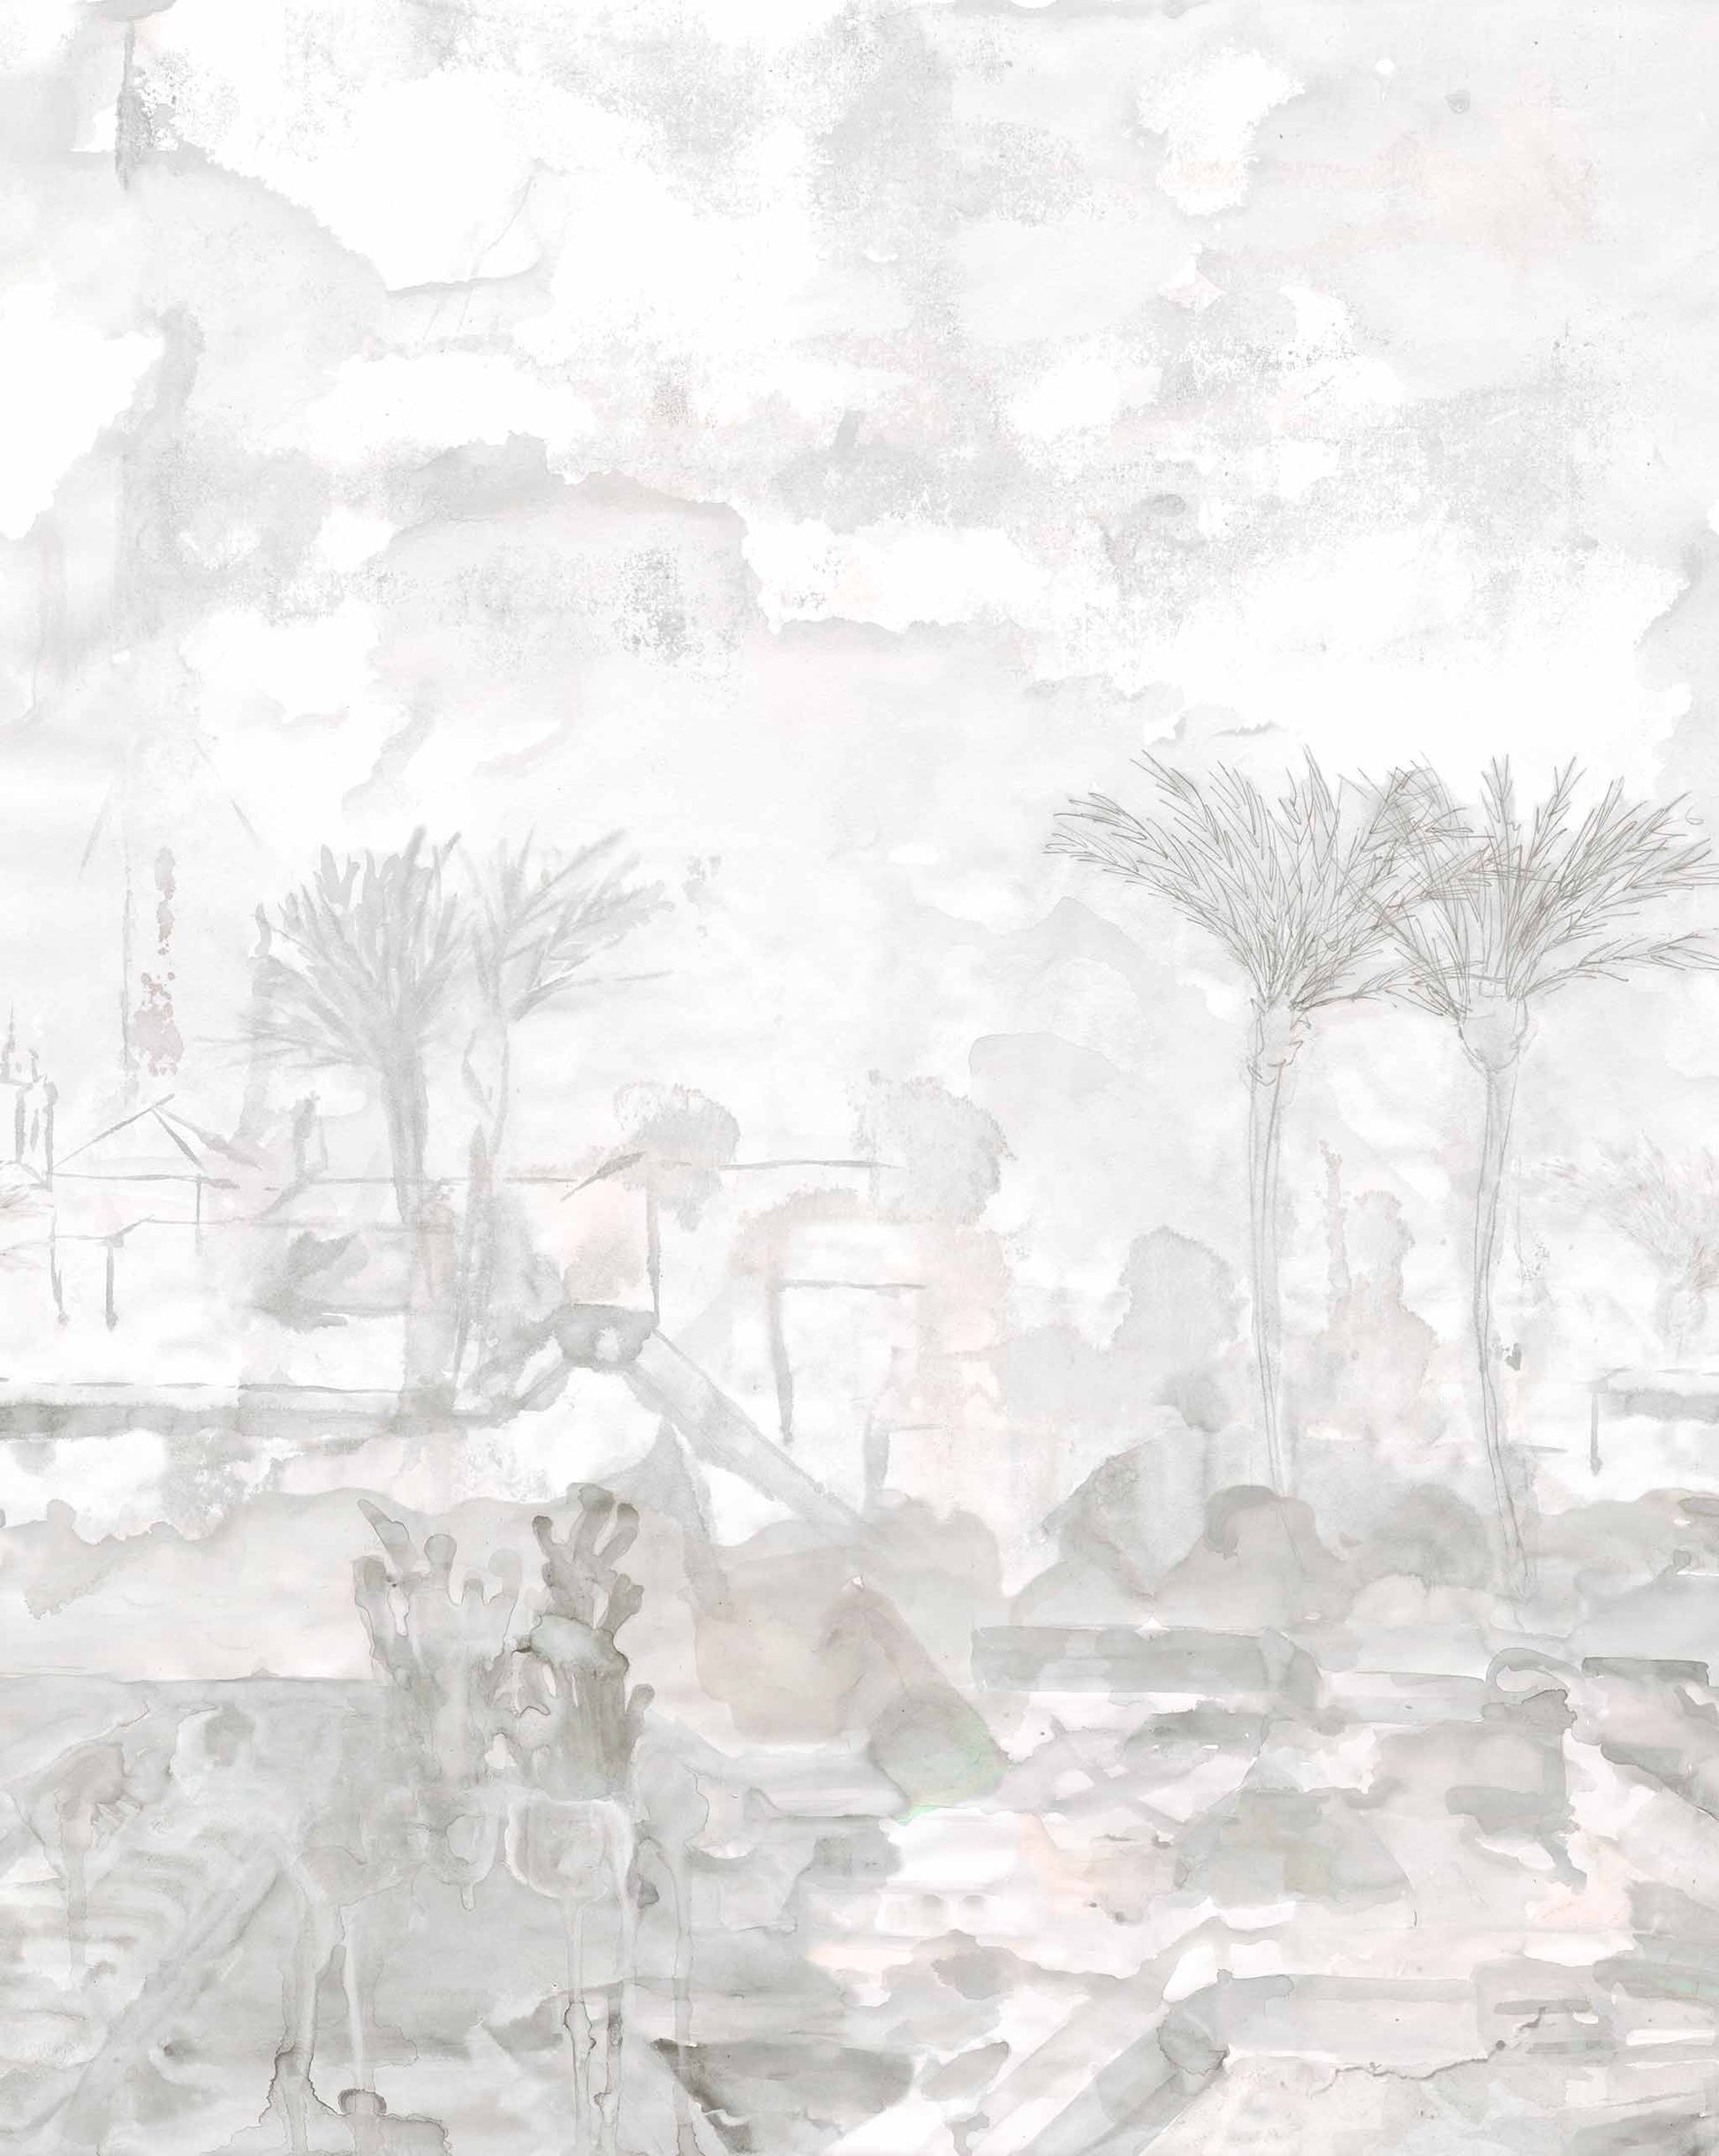 A monochrome watercolor painting depicting an abstract Marrakech cityscape with indistinct forms resembling trees and architectural structures using the Palmeraie Wallpaper Mural||Lumier.